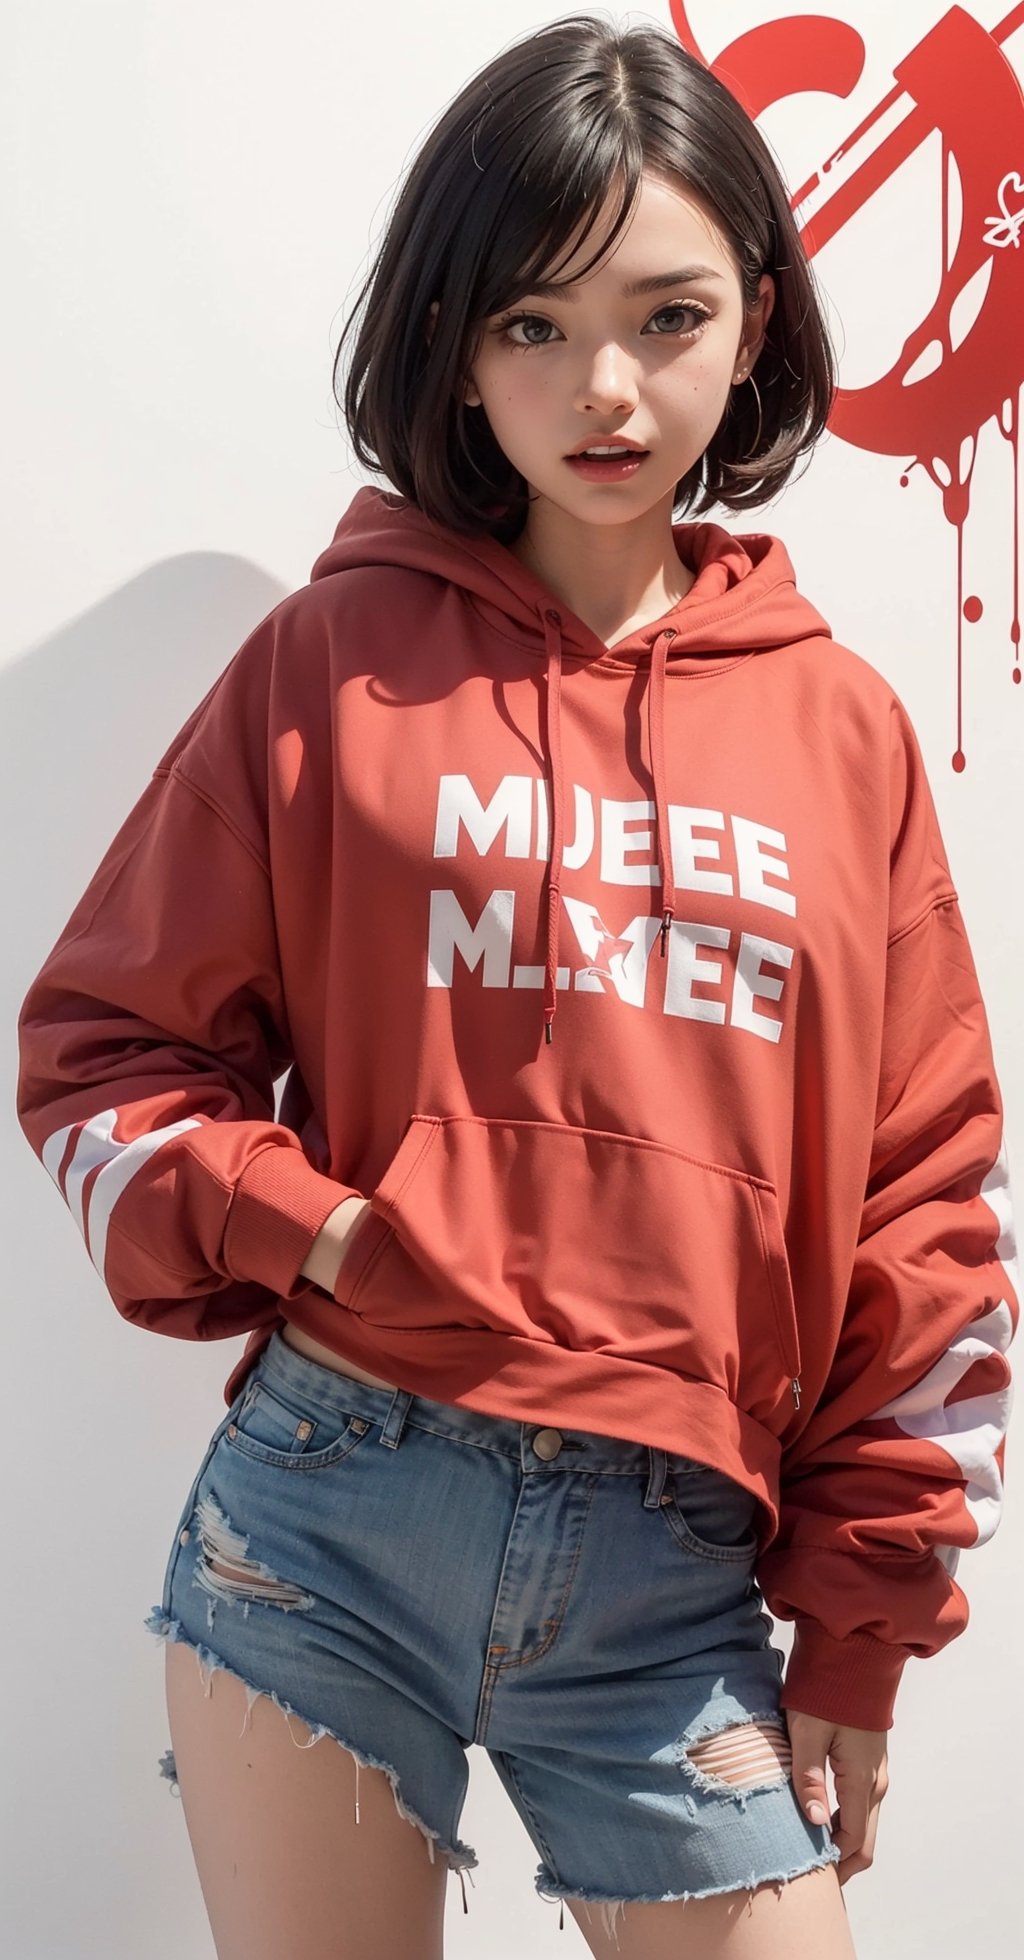 technicolor paint splash background, a picture of a teenage girl wearing red and white cropped hoodie, (((a text is written on the fron of the hoodie that says (("fuck me")) )))